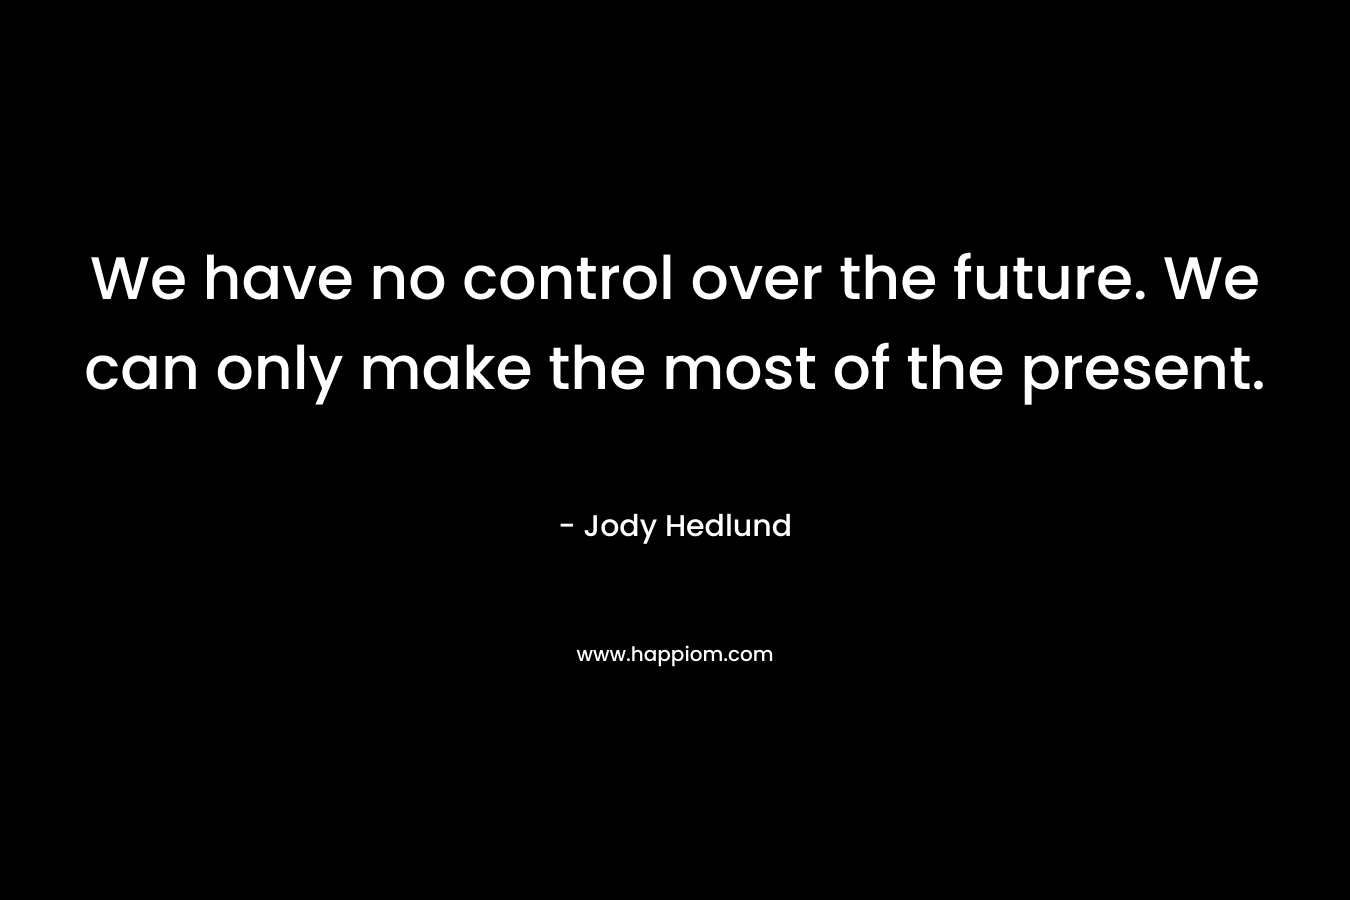 We have no control over the future. We can only make the most of the present.